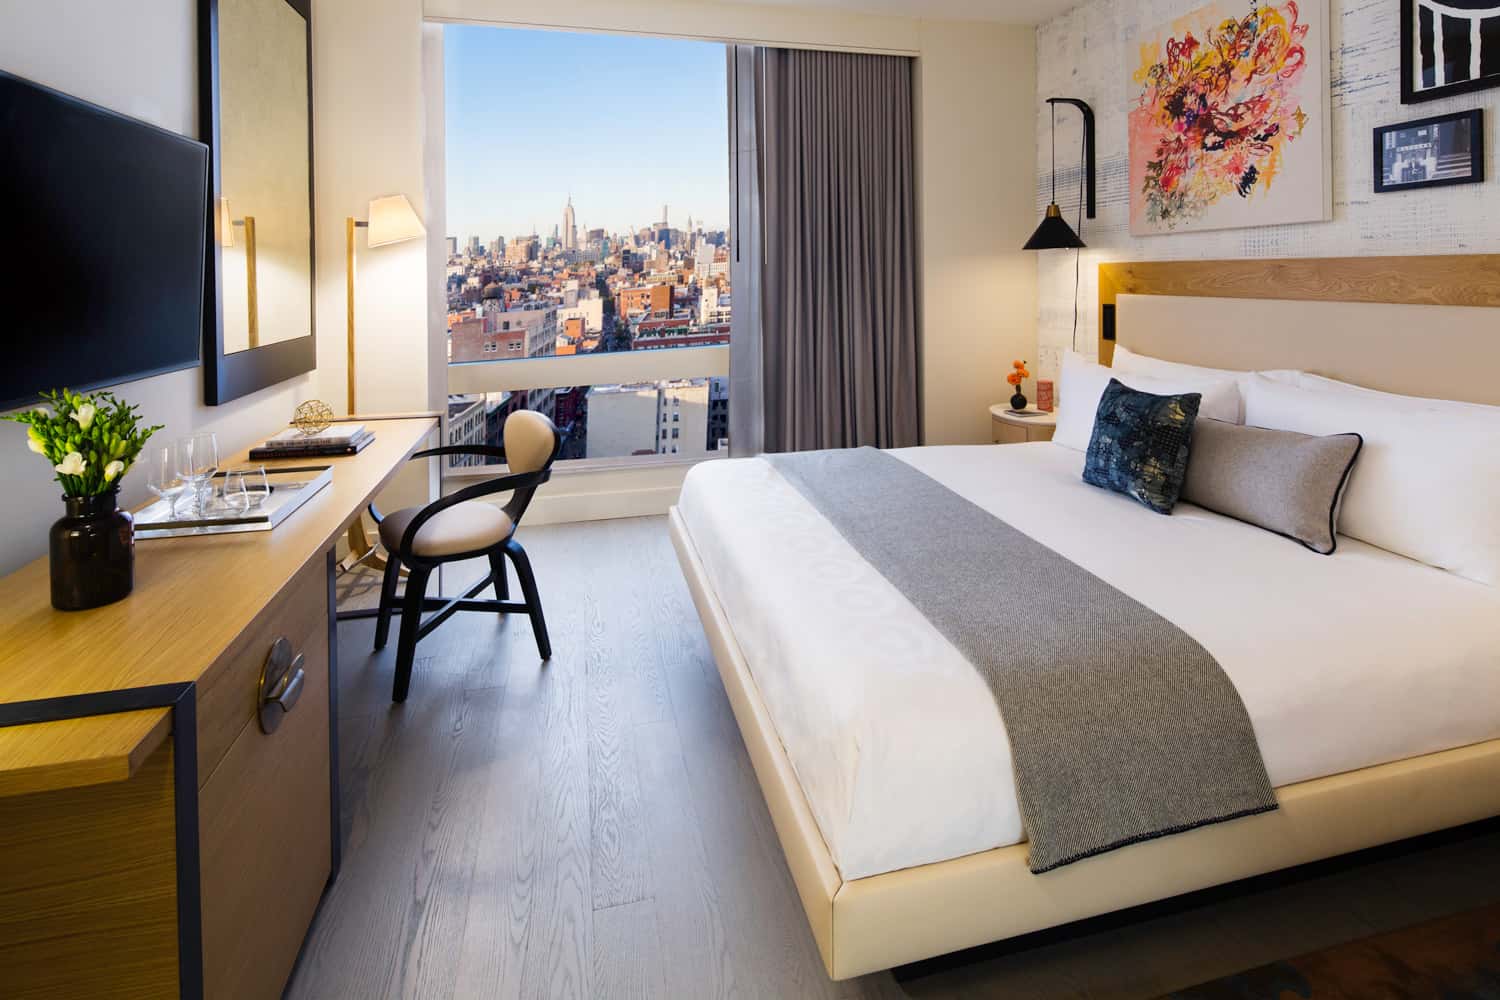 Guestrooms and suites at Hotel 50 Bowery in NYC feature distressed oak floors and luxe linens and a color palette of traditional chinaware colors of blue and white.